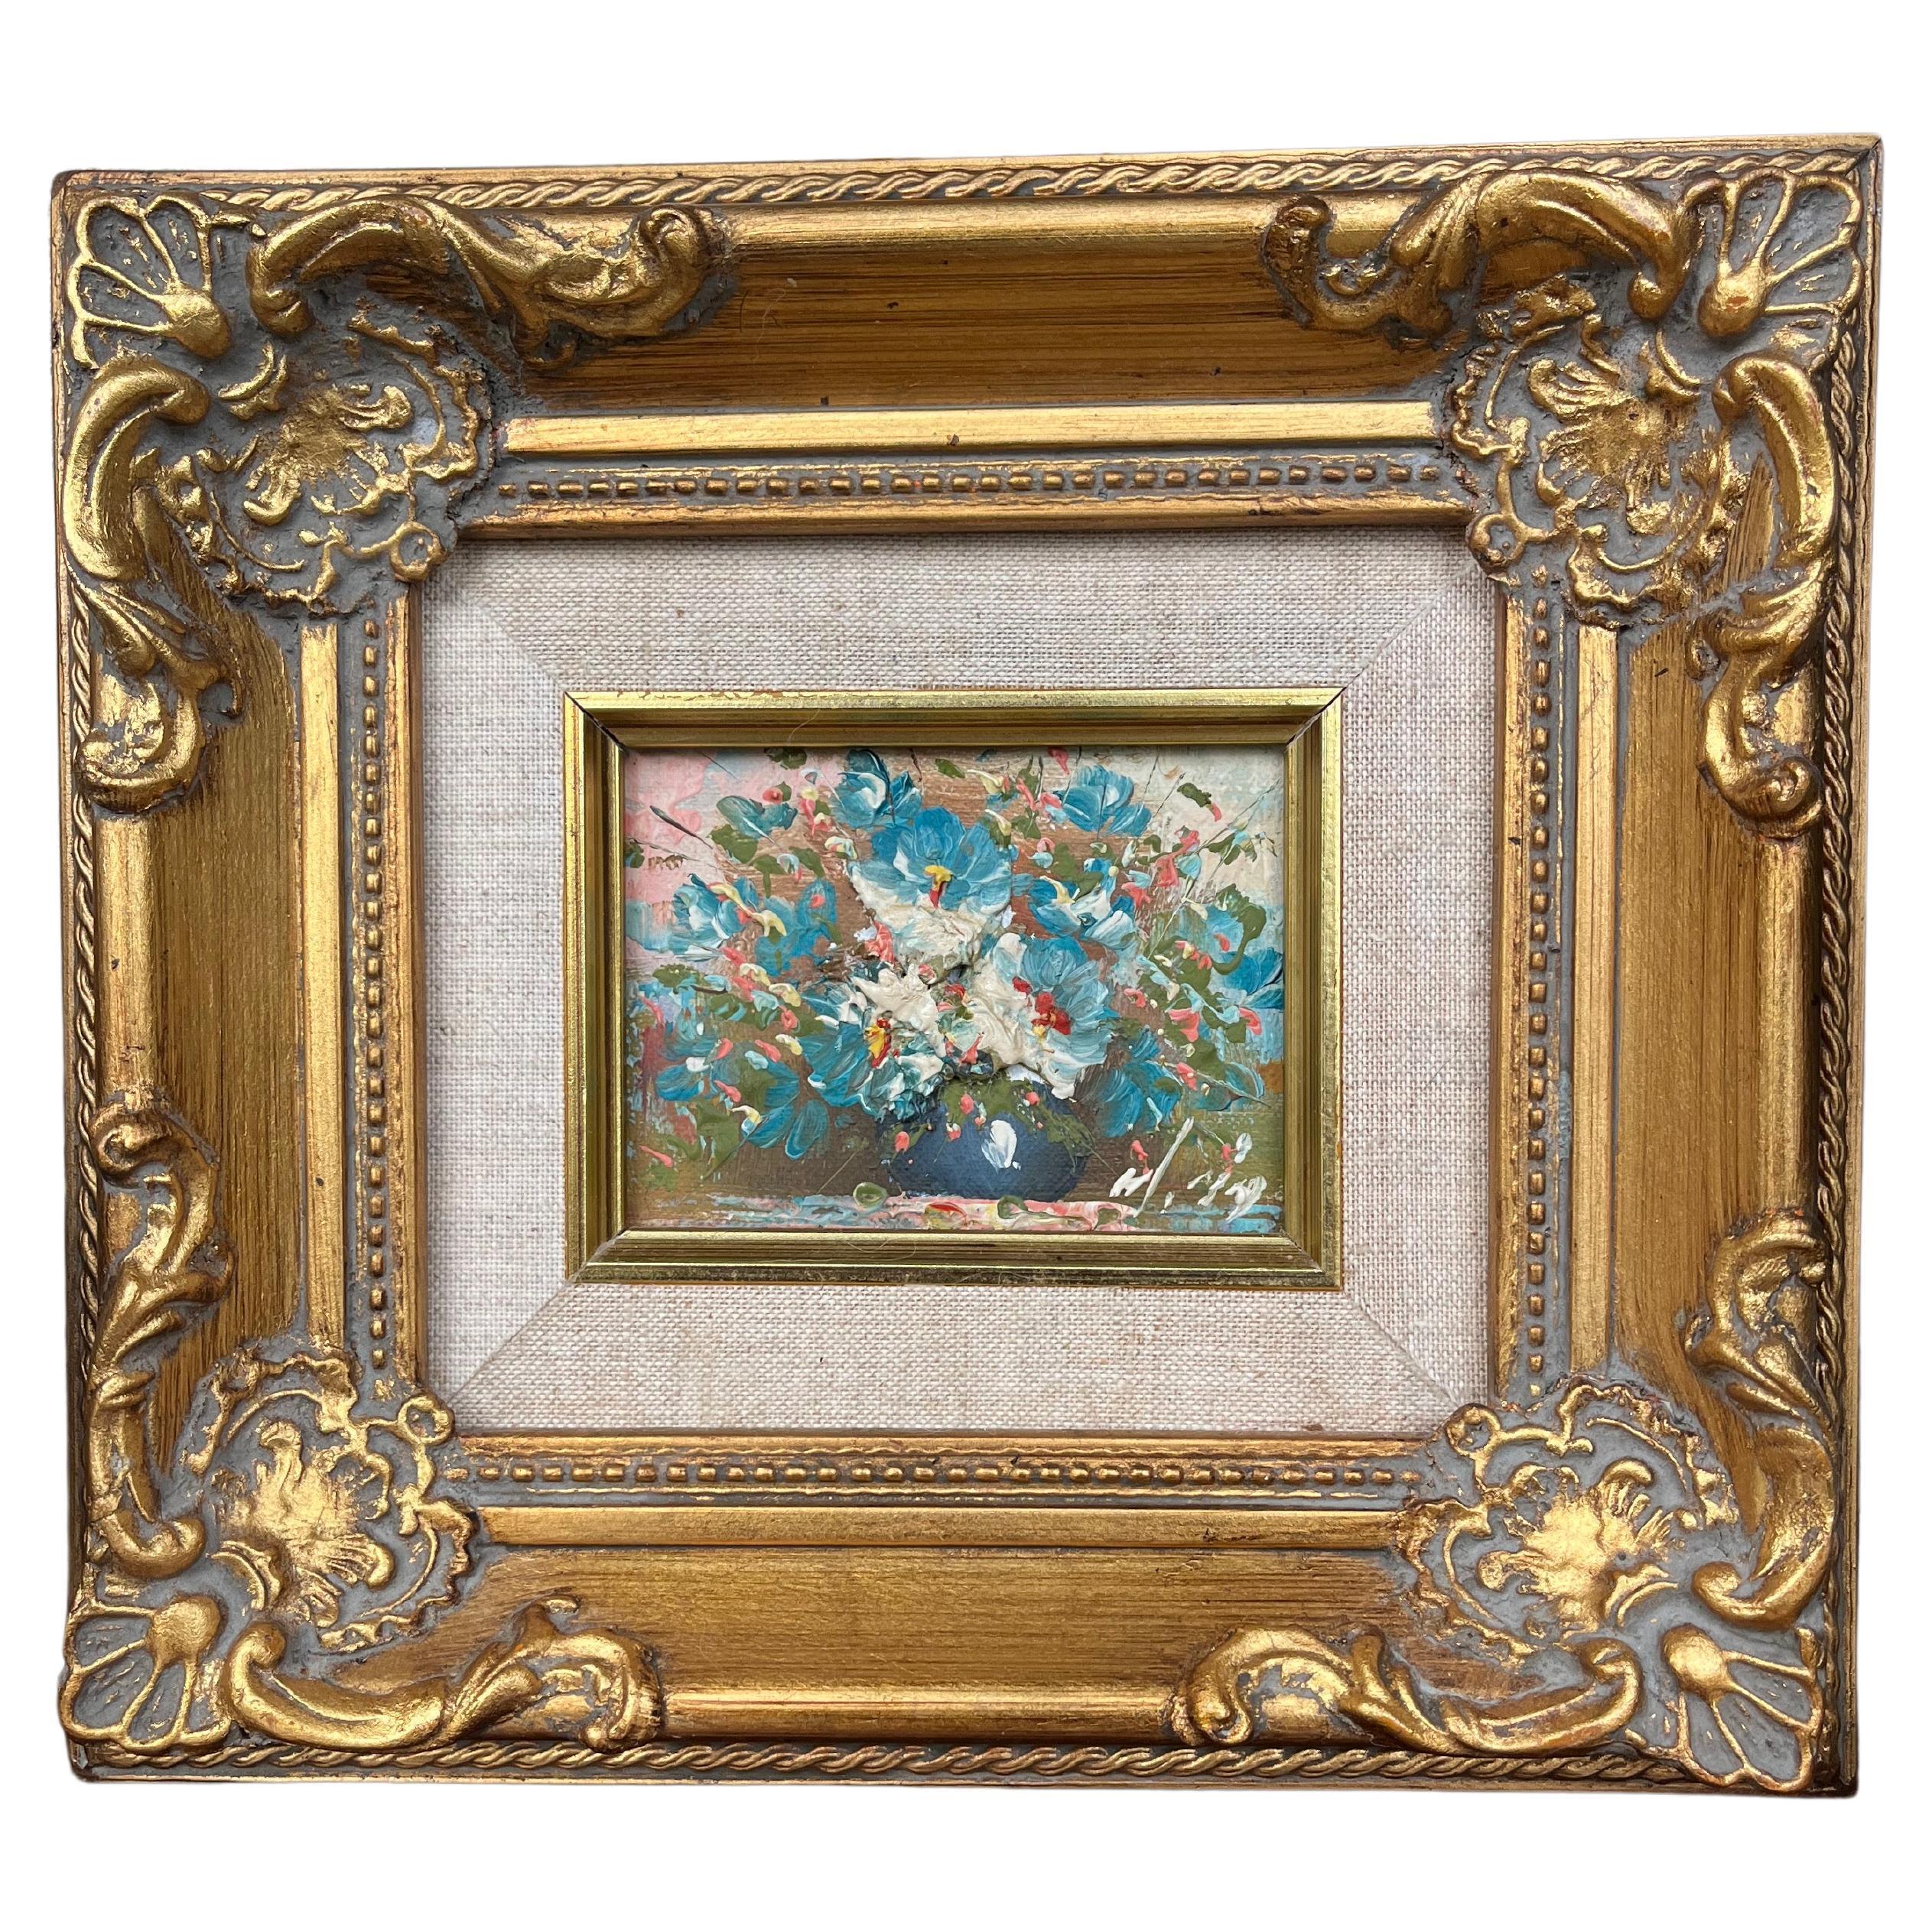 Vintage Exquisite Miniature Abstract Floral Oil Painting in Ornate Gilt Frame